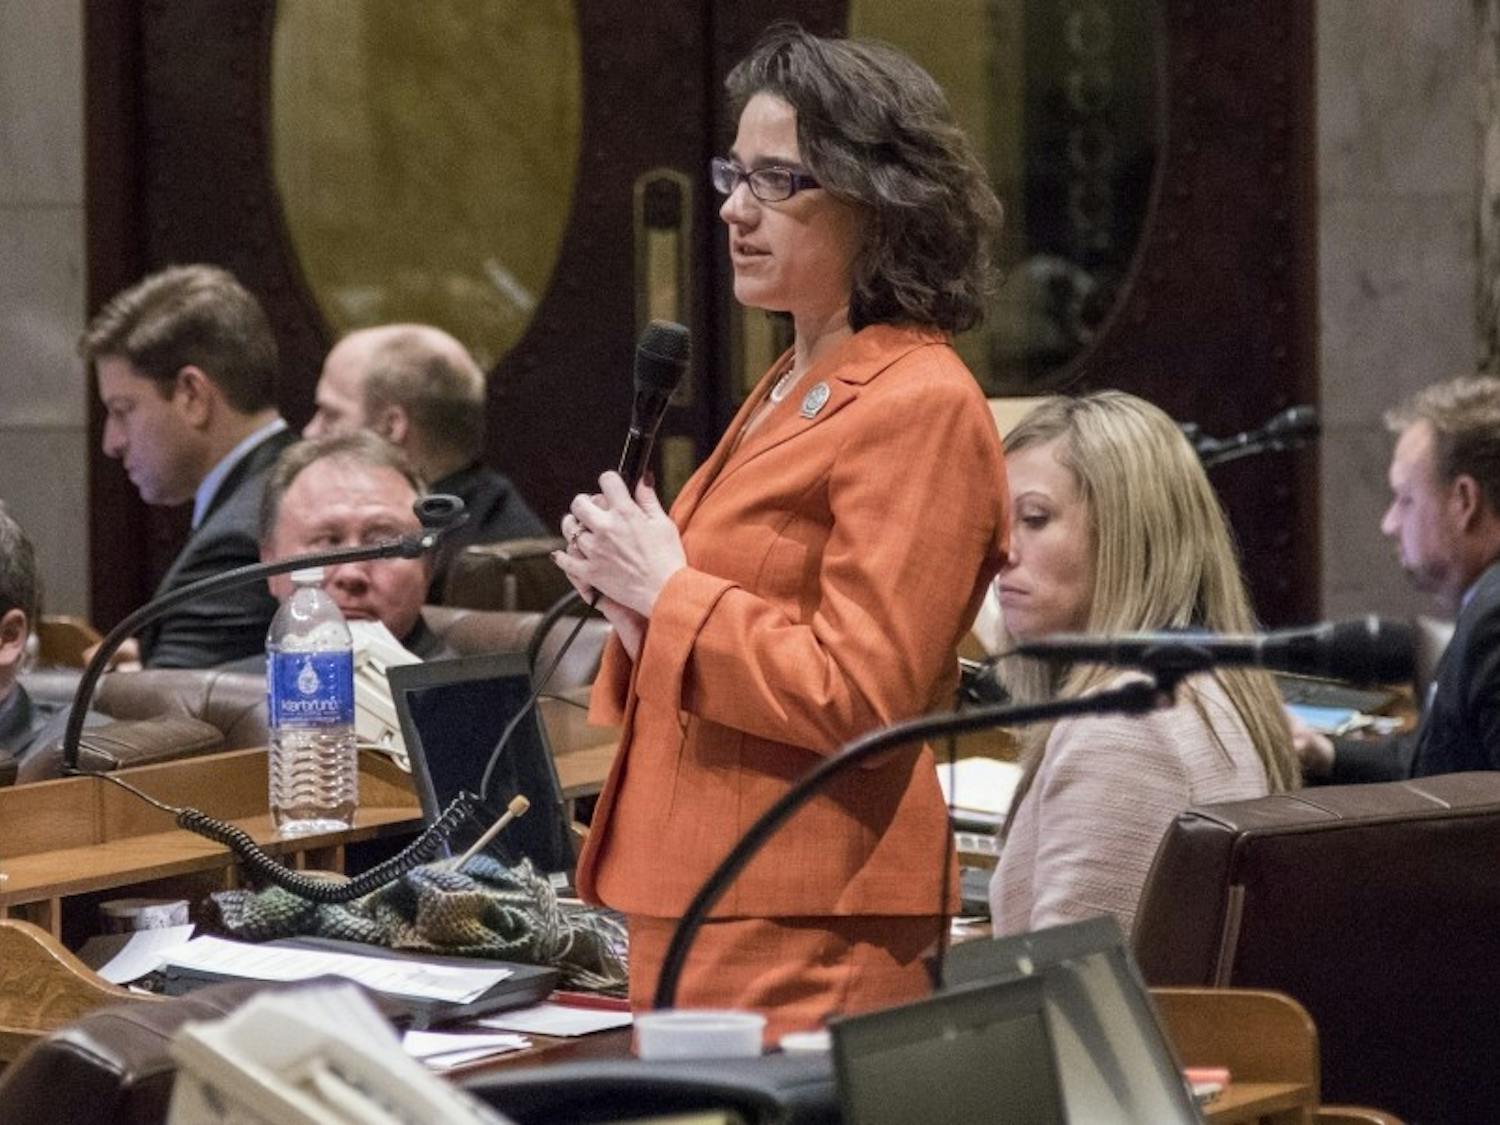 After a vast majority of those who could voted to show support for the legalization of cannabis in a series of midterm referenda, state Rep. Melissa Sargent has vowed to bring back legislation to expand cannabis’ legal uses.